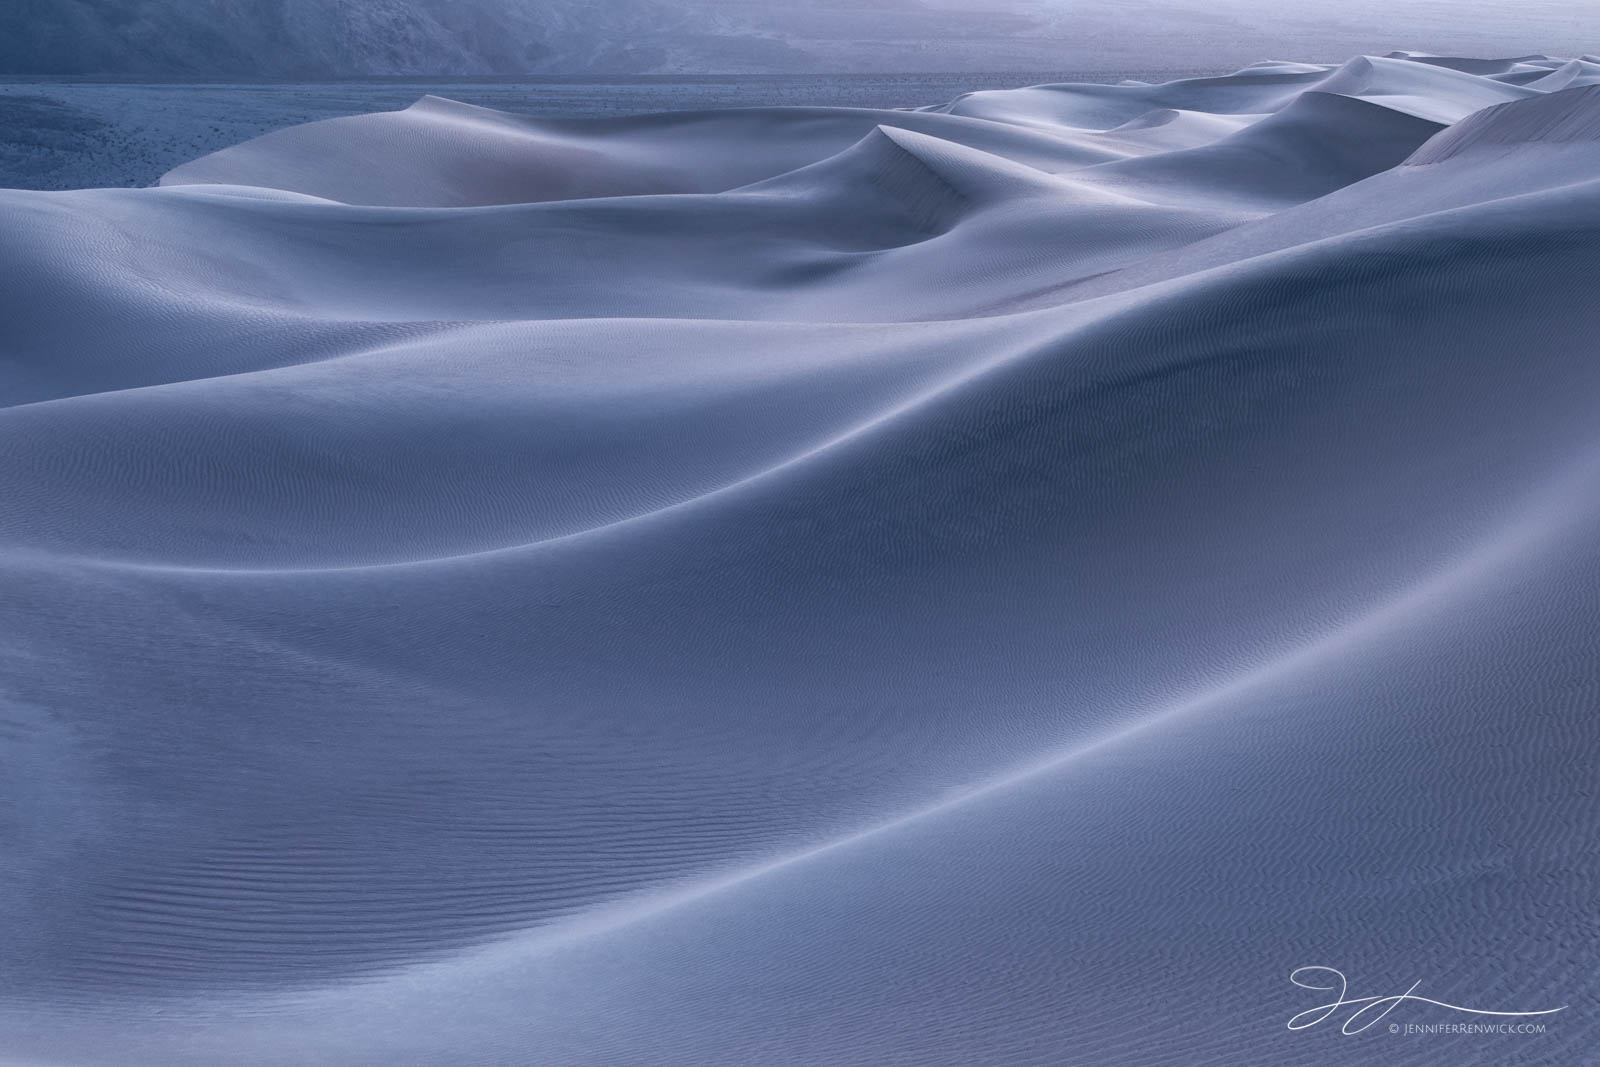 Blue and silver tones accent the sand dunes during evening twilight.